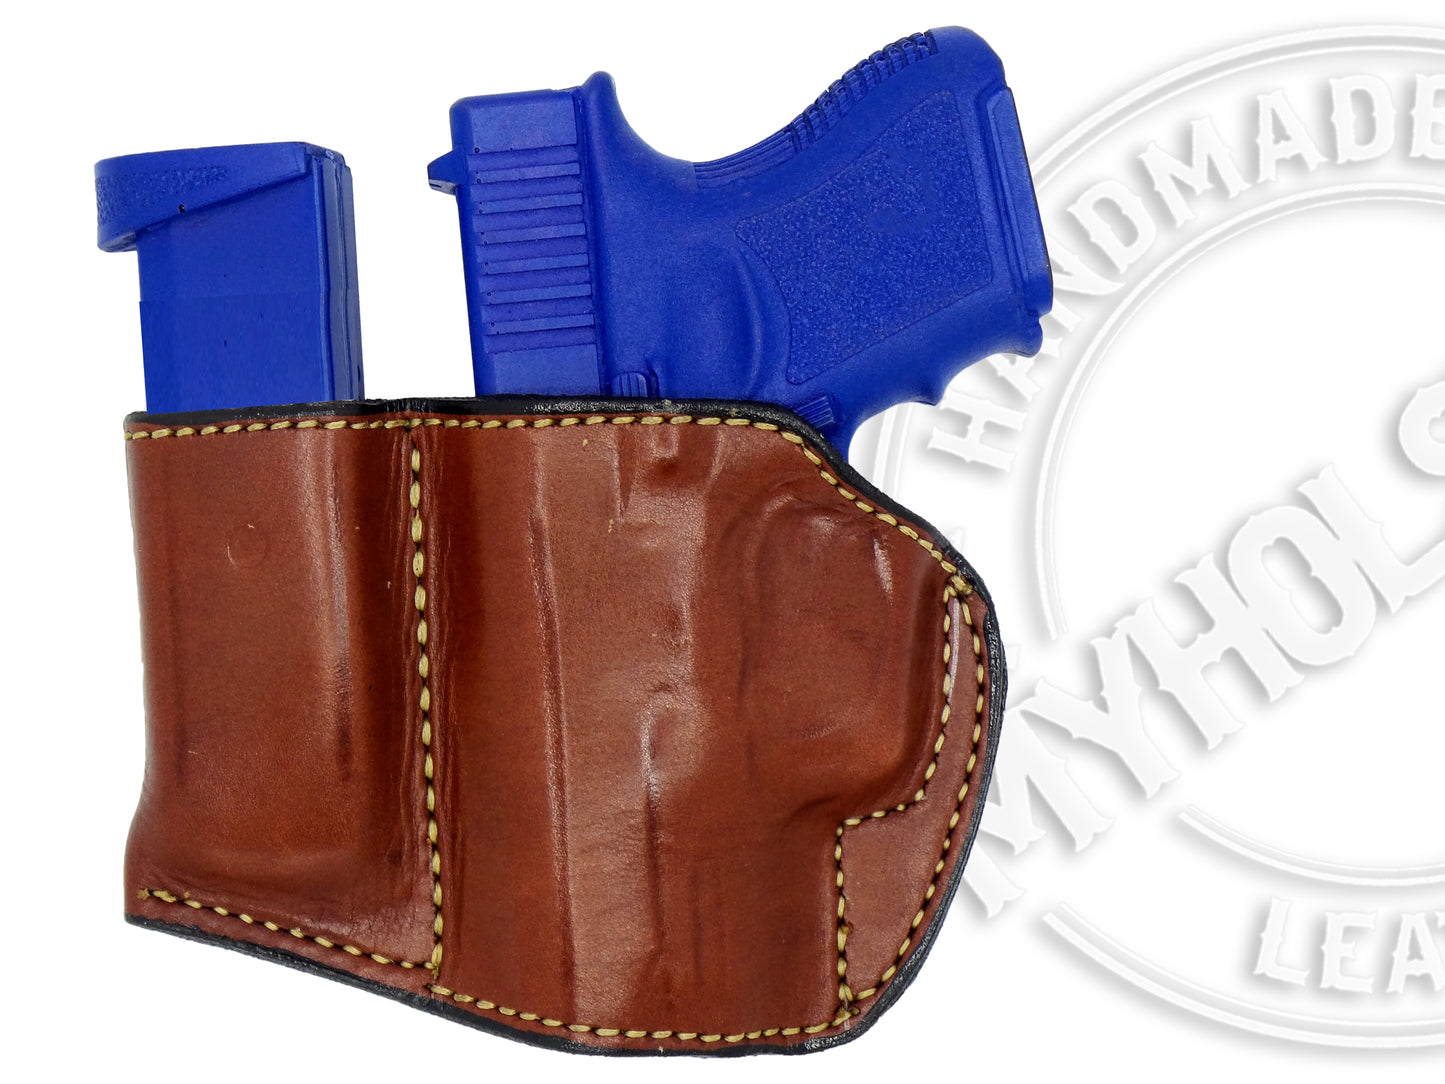 GLOCK 21 Holster and Mag Pouch Combo - Right Hand OWB Leather Belt Holster